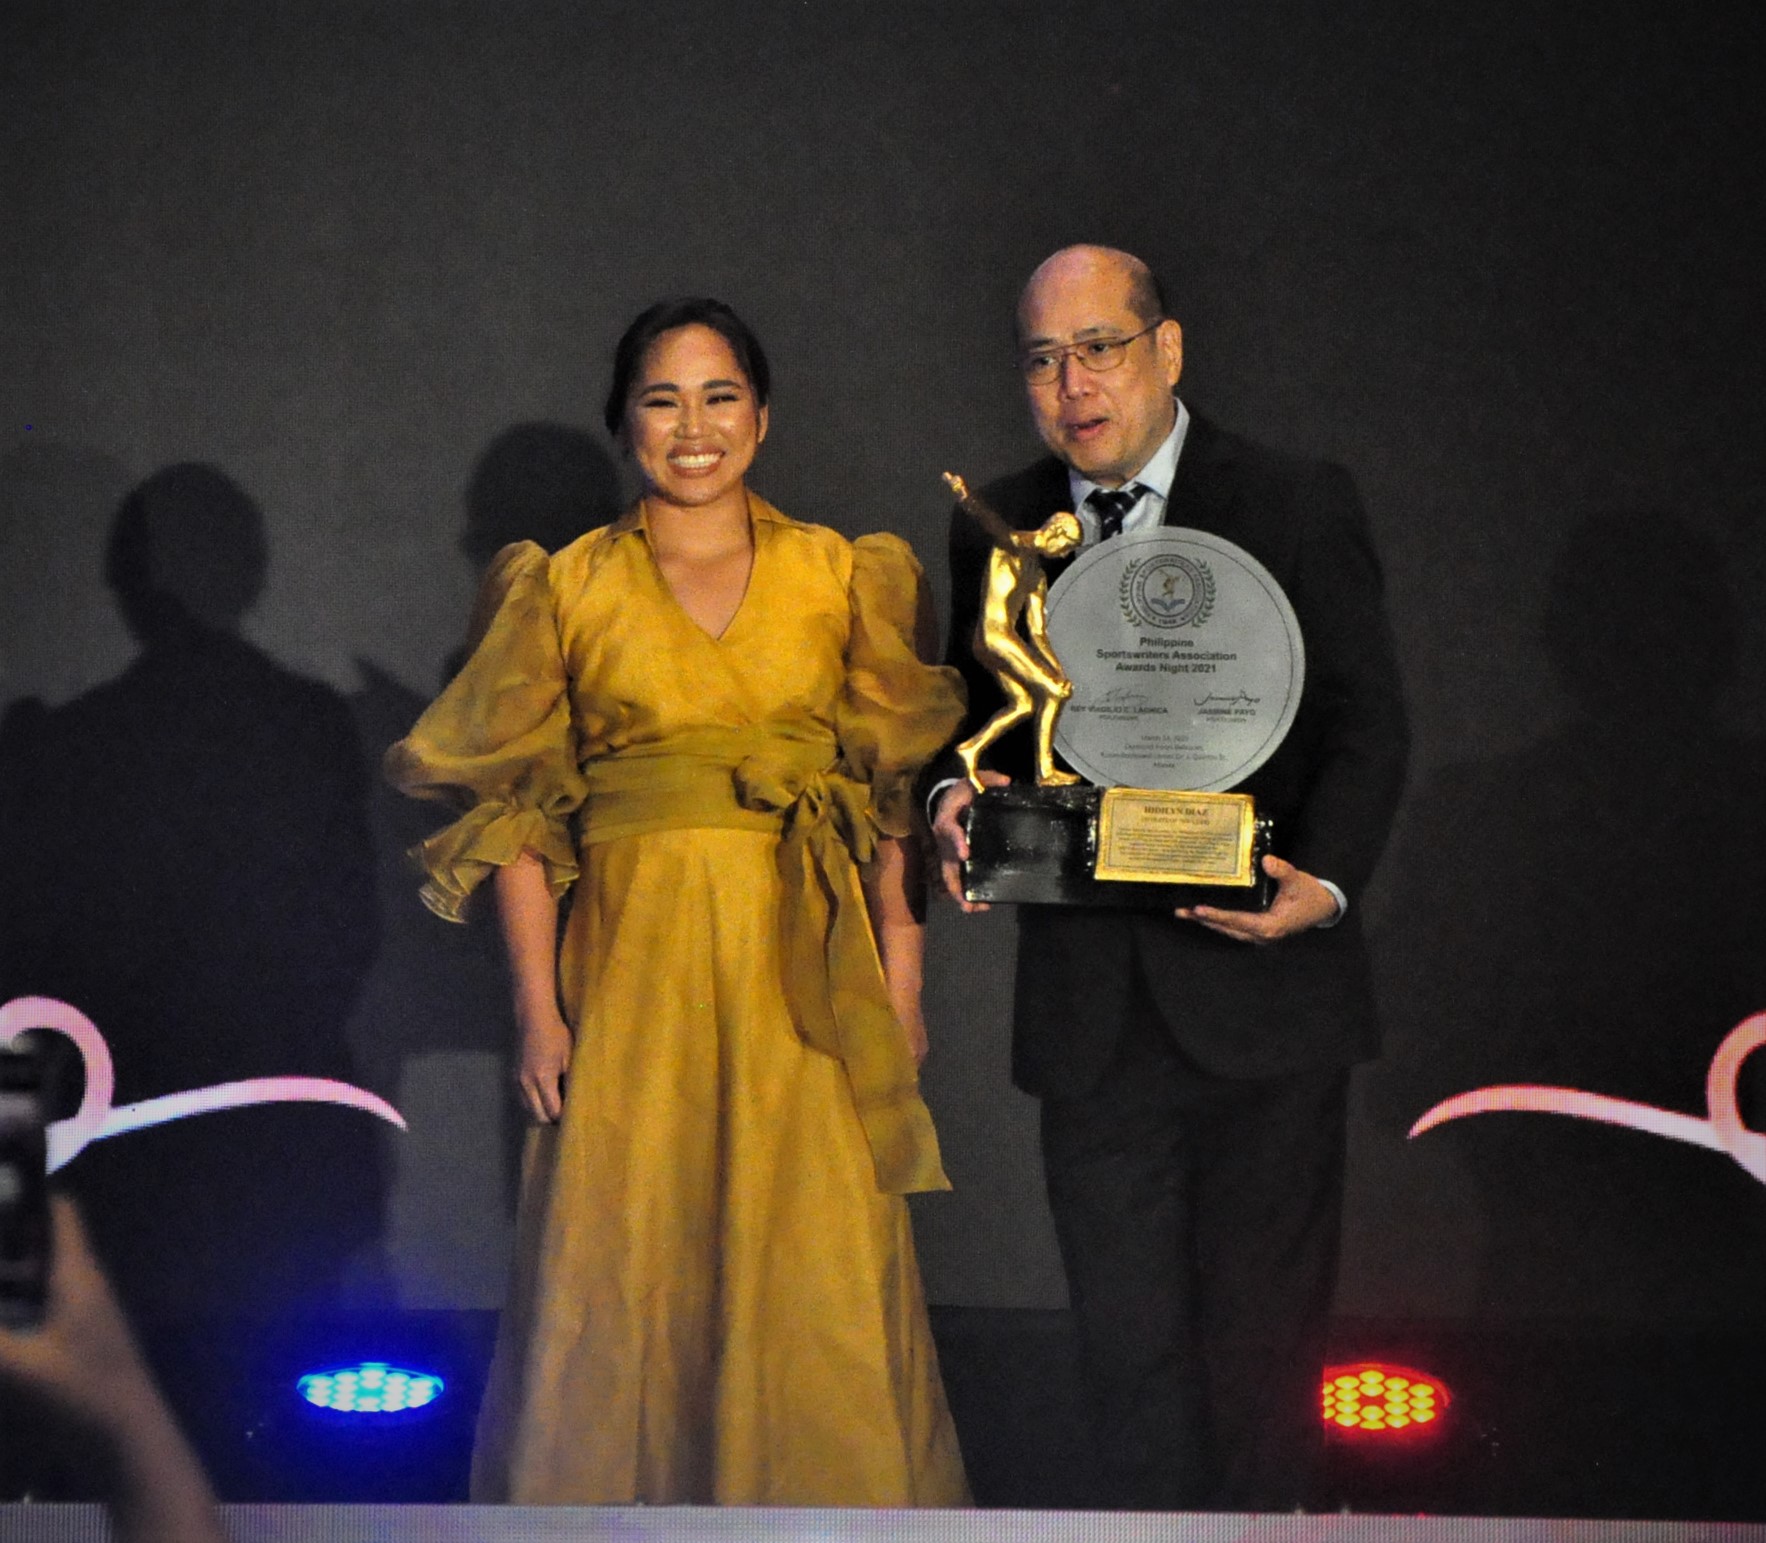 Hidilyn Diaz, the country’s first Olympic gold medalist, receives her Athlete of the Year award from the Philippine Sportswriters Association during the 2022 SMC-PSA Awards night on Monday at Diamond Hotel. CONTRIBUTED PHOTOS/ ANDY SANTOS